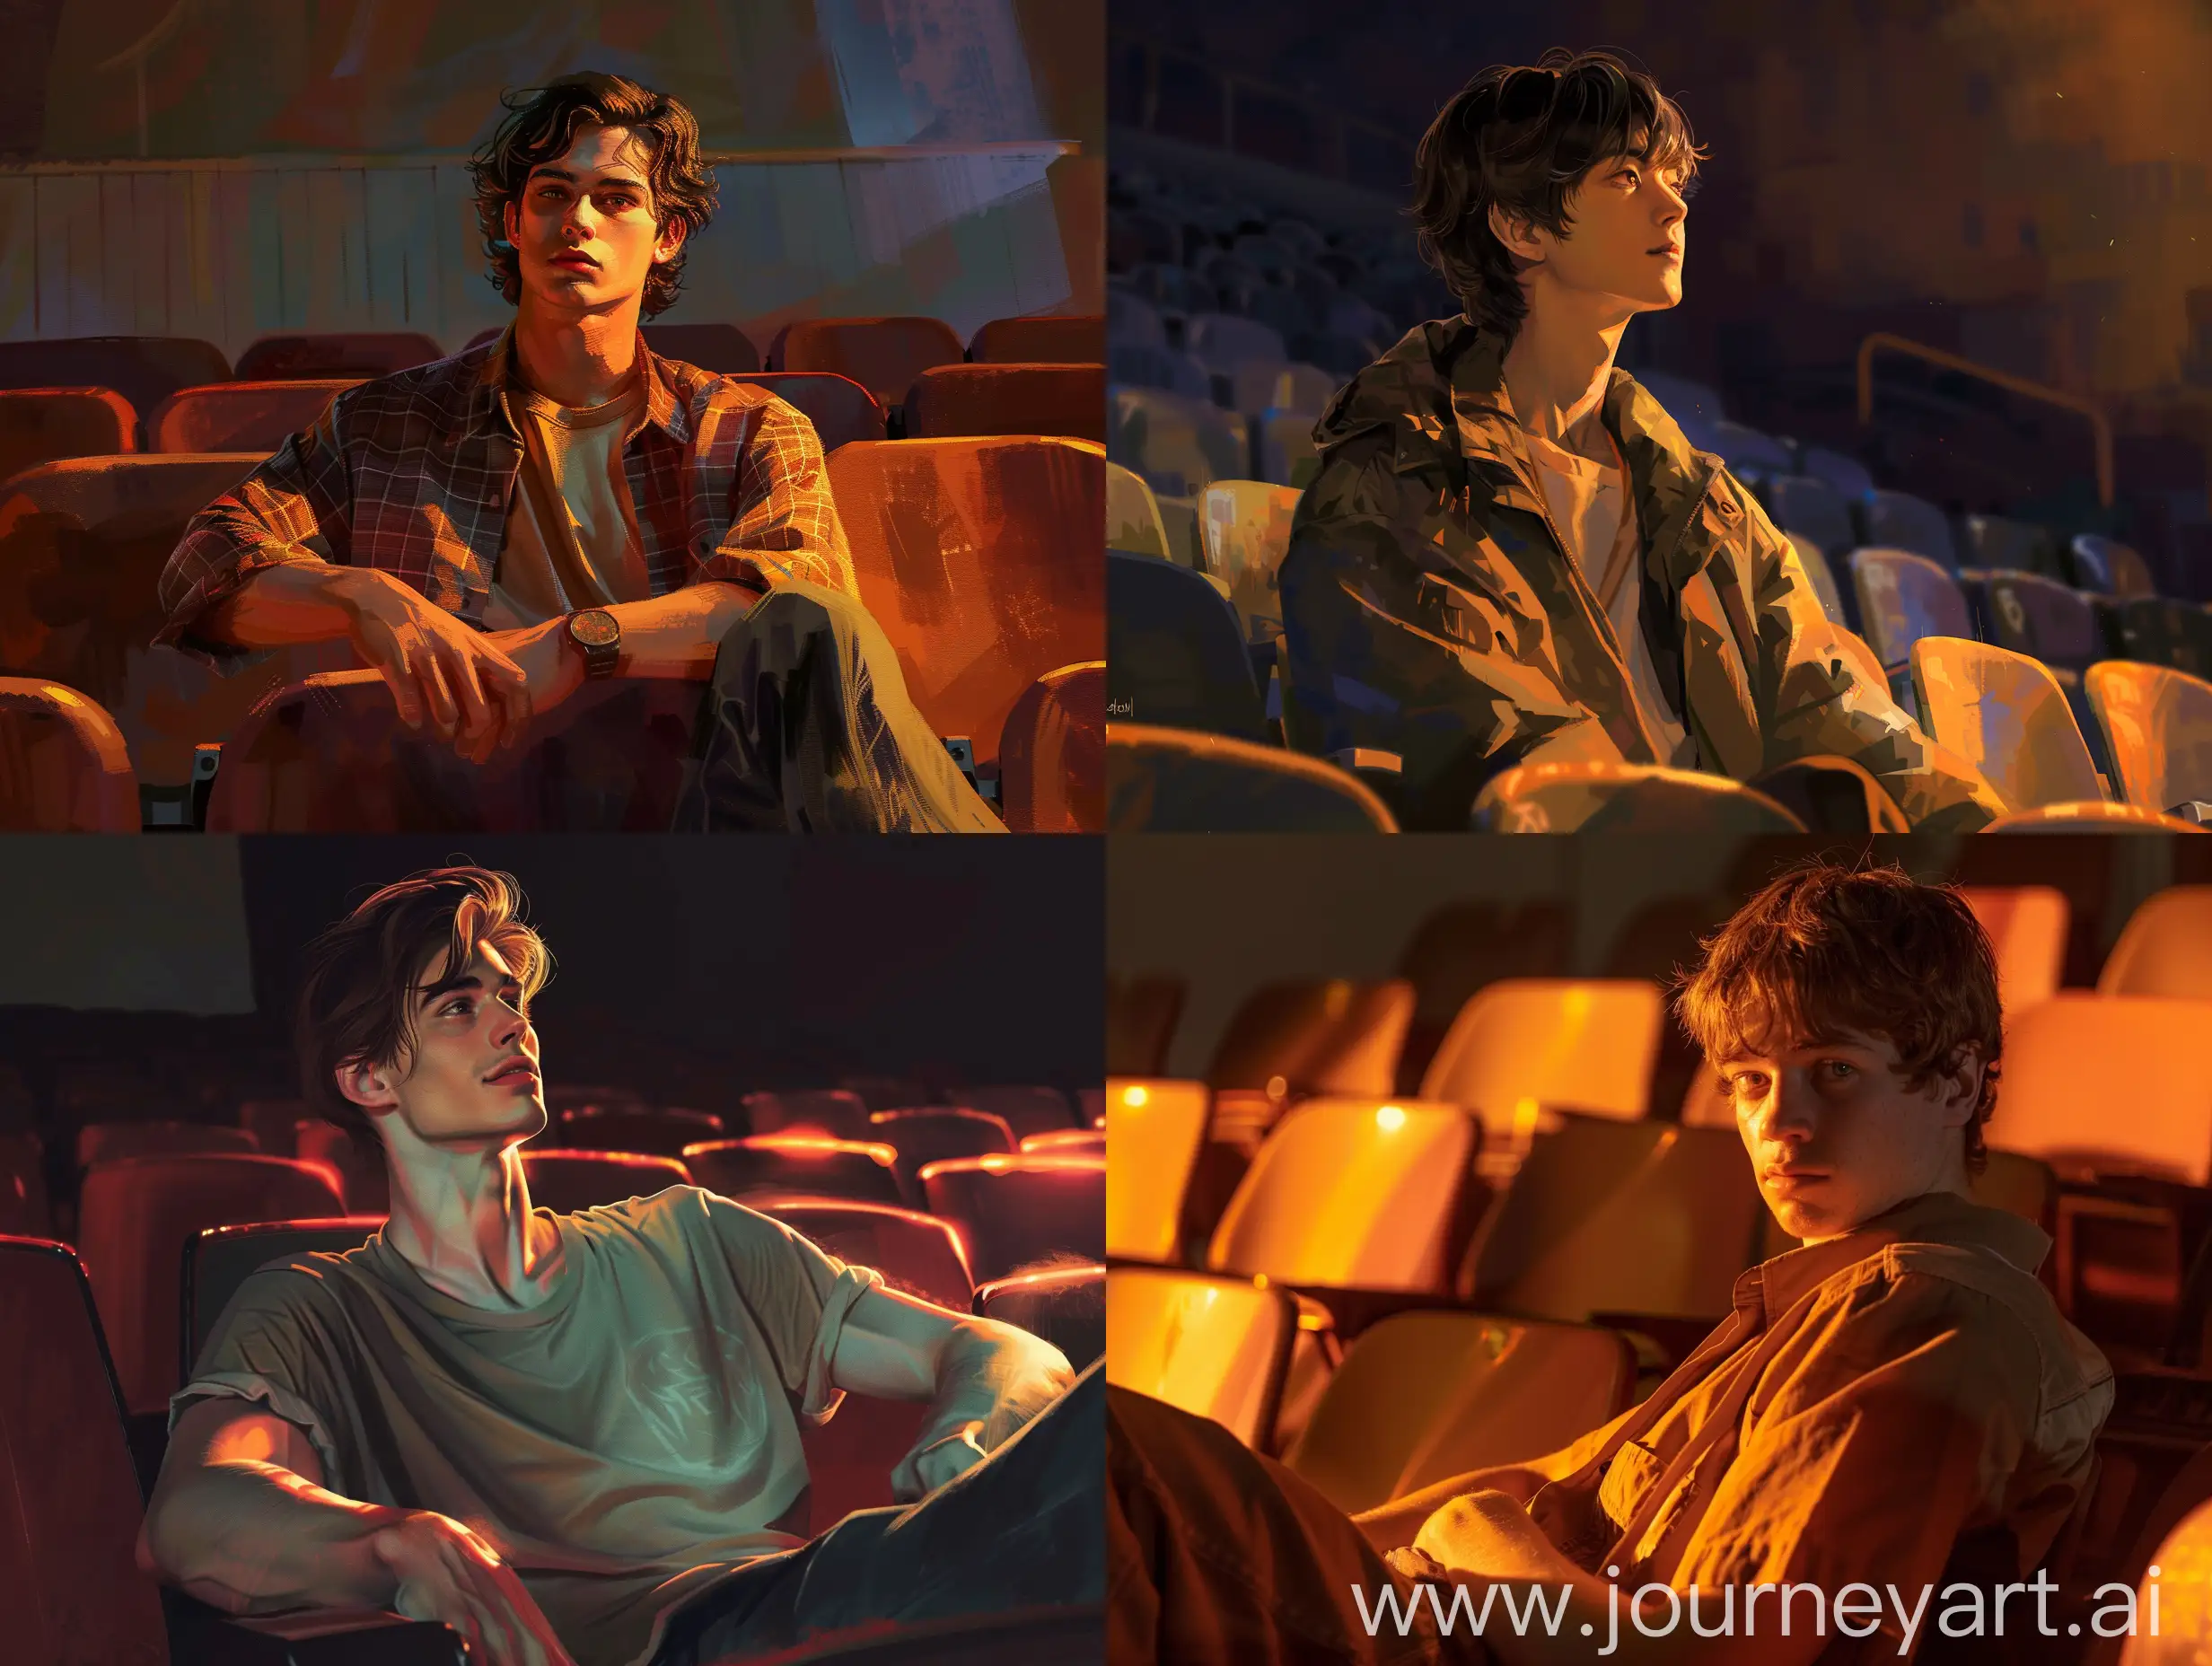 the guy is sitting relaxed in the stands, he has a beautiful appearance, brown hair, he is illuminated by a warm light. The guy should be in the frame in full height, in a sitting position, he should look at the viewer opposite, but NOT TURN to HIM